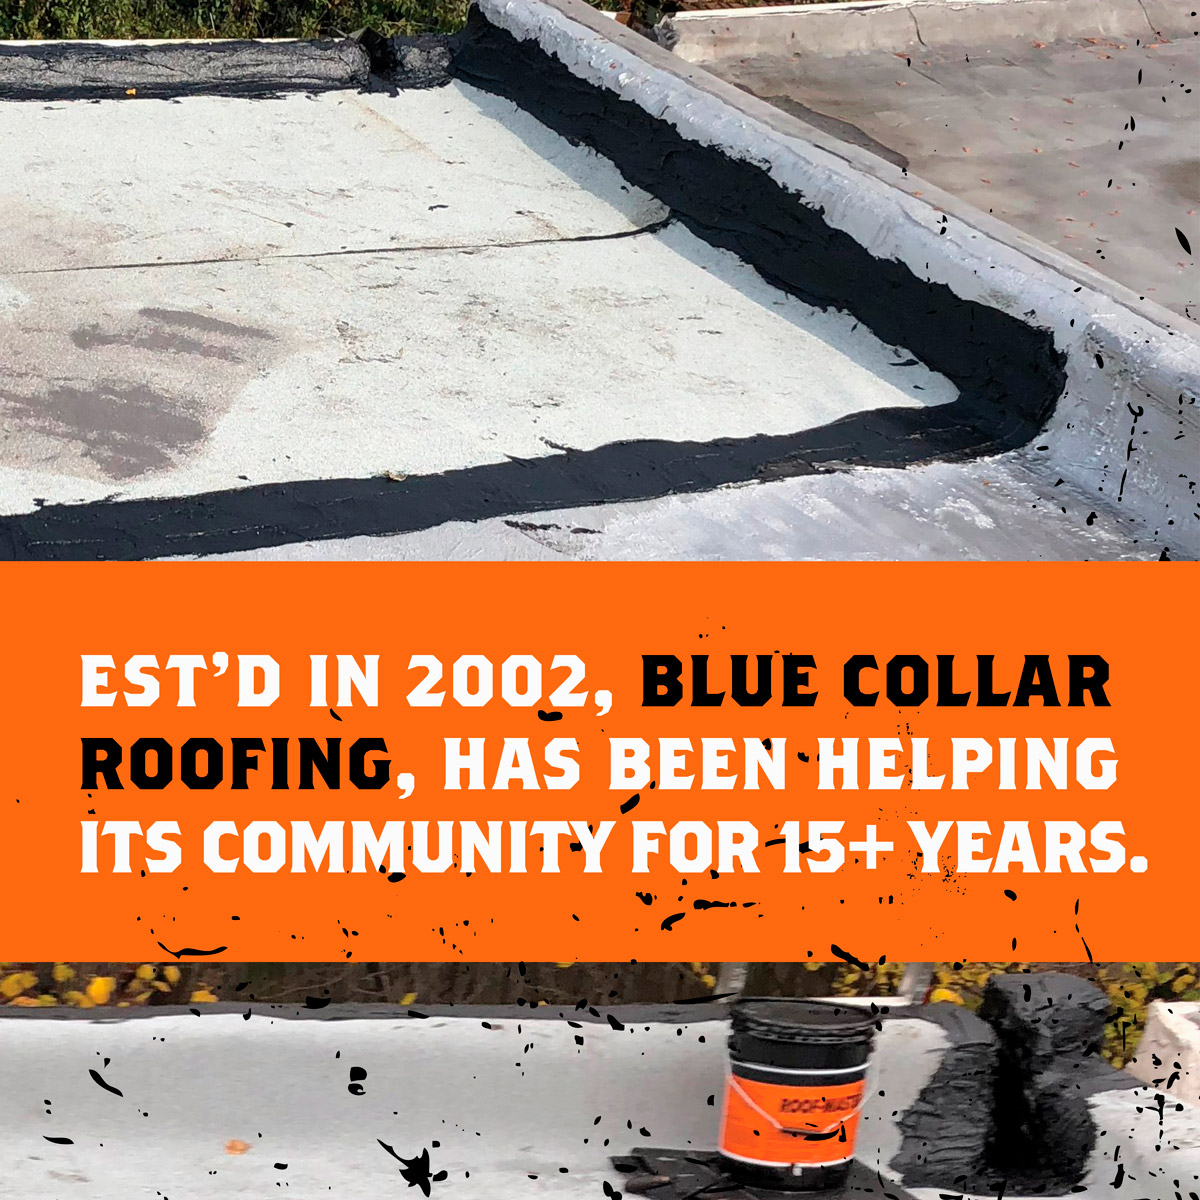 Established in 2002, Blue Collar Roofing, has been Helping its Community for 15+ Years